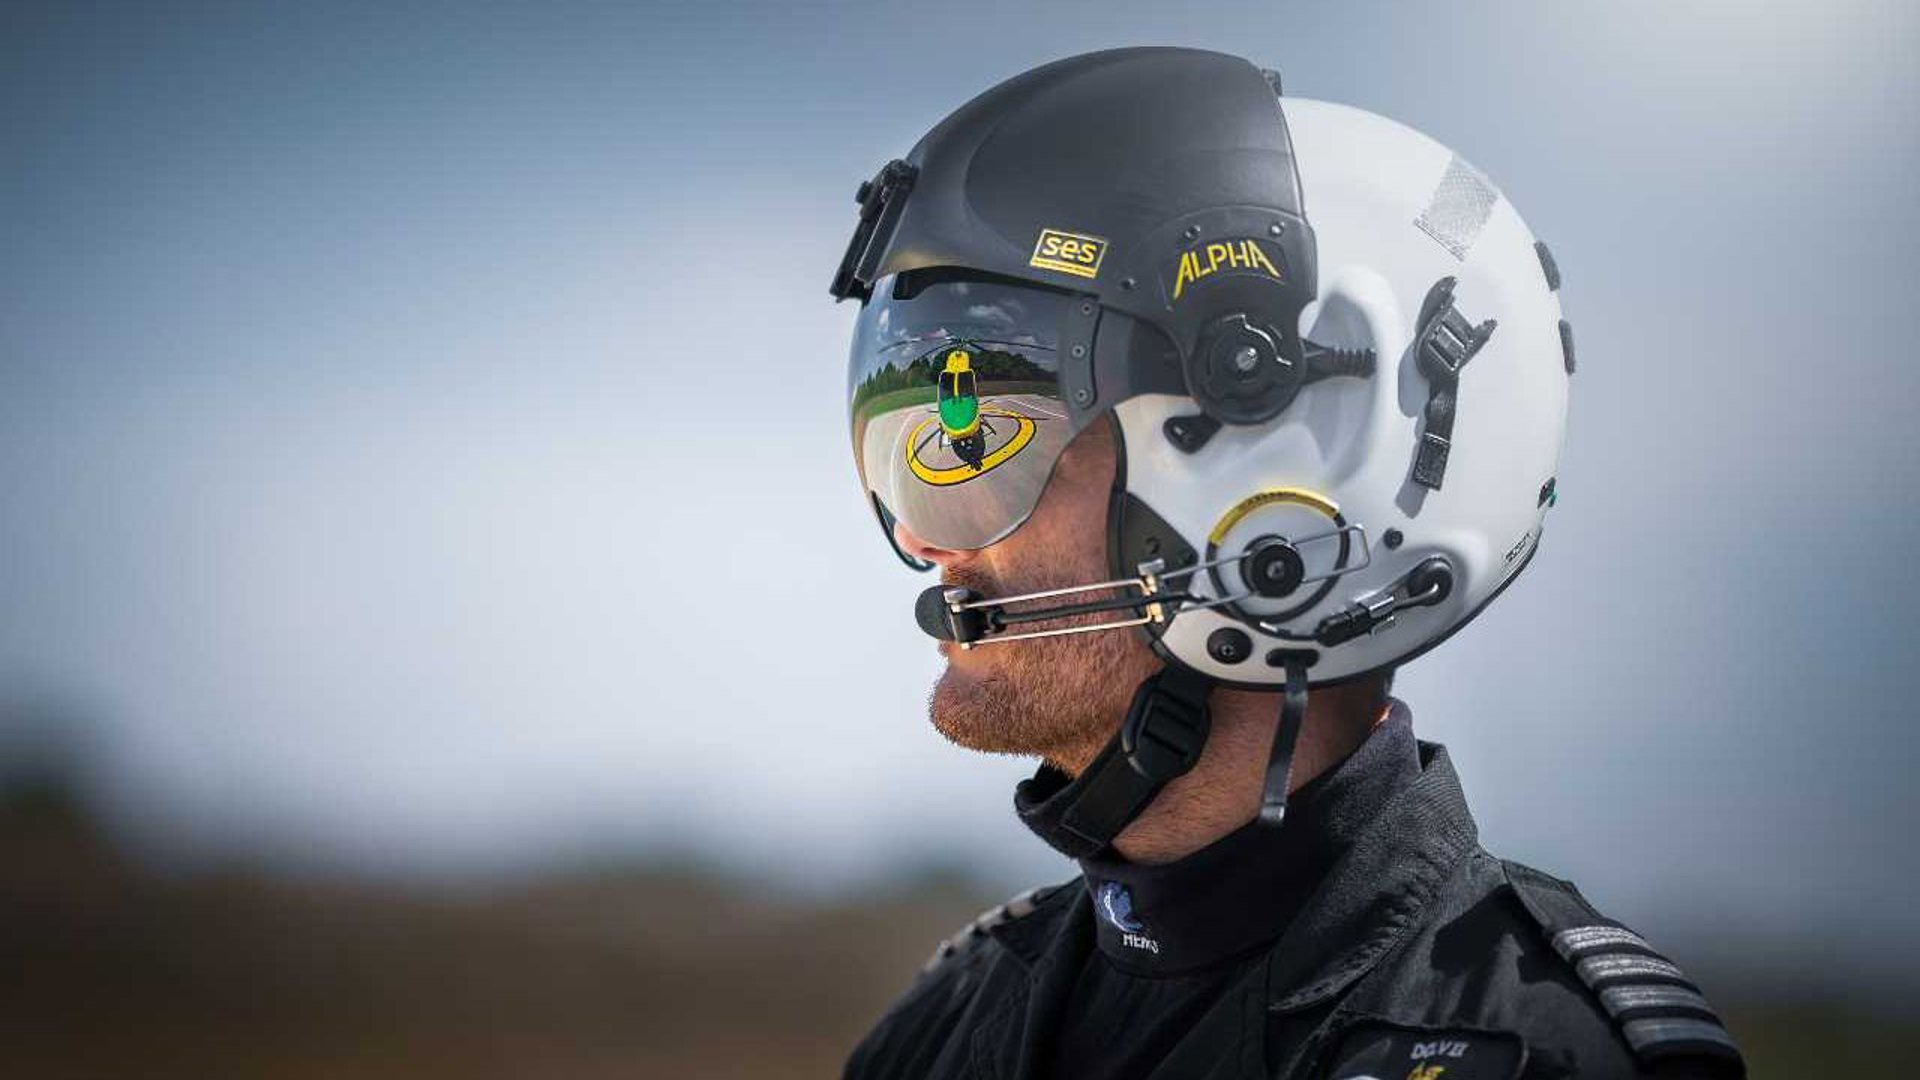 Pilot Rob Collingwood looking at the helicopter whilst wearing a flight helmet and visor. There is a reflection of the helicopter in the visor.